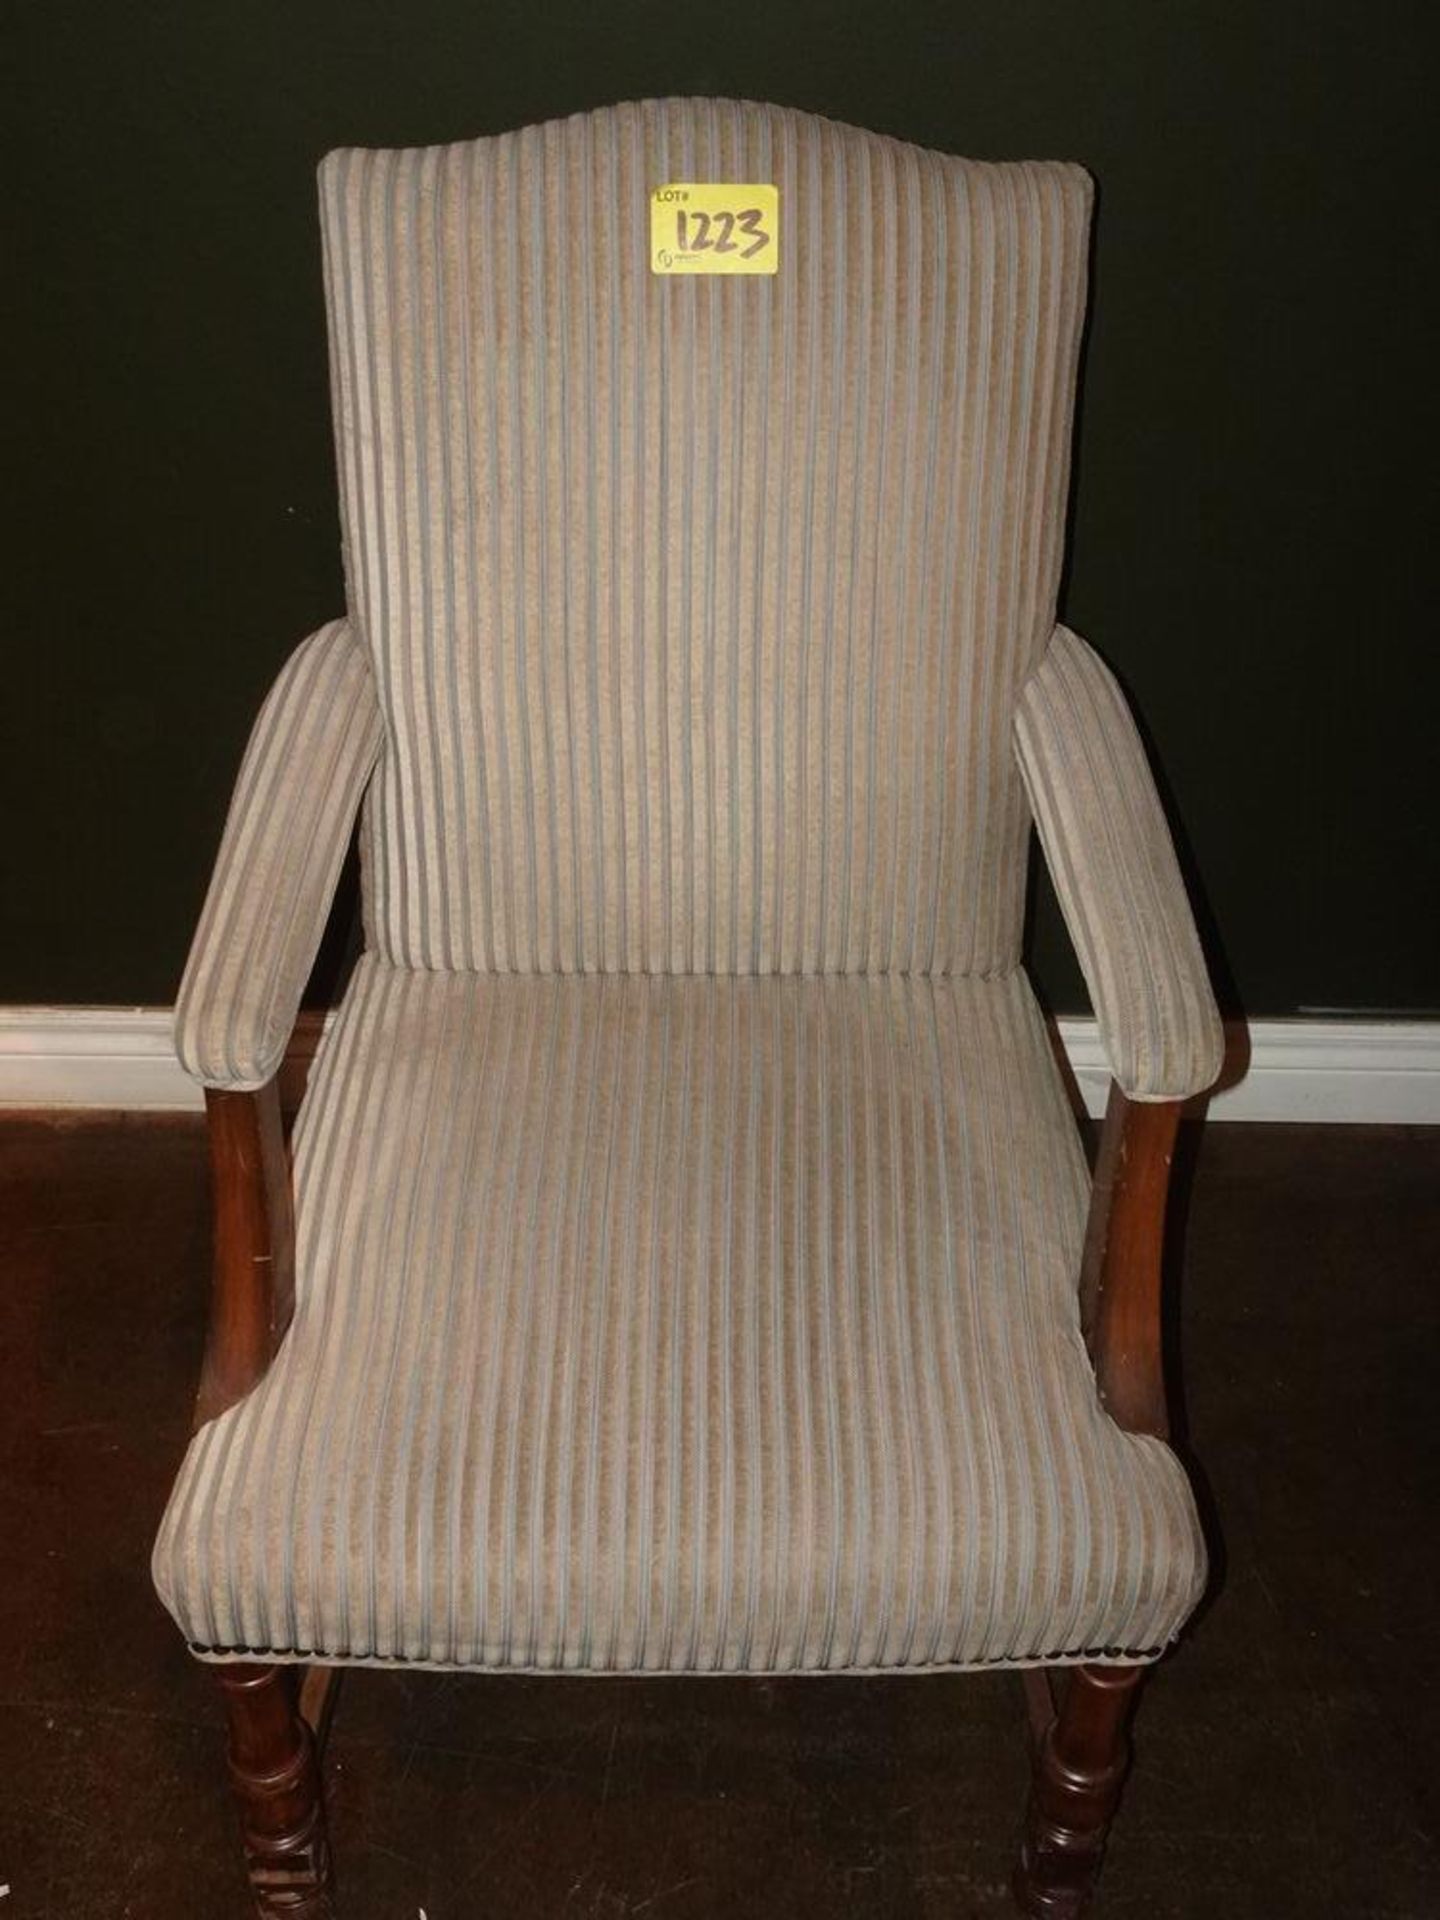 ARM CHAIR - PALE BLUE STRIPE W/STUDS - Image 2 of 3